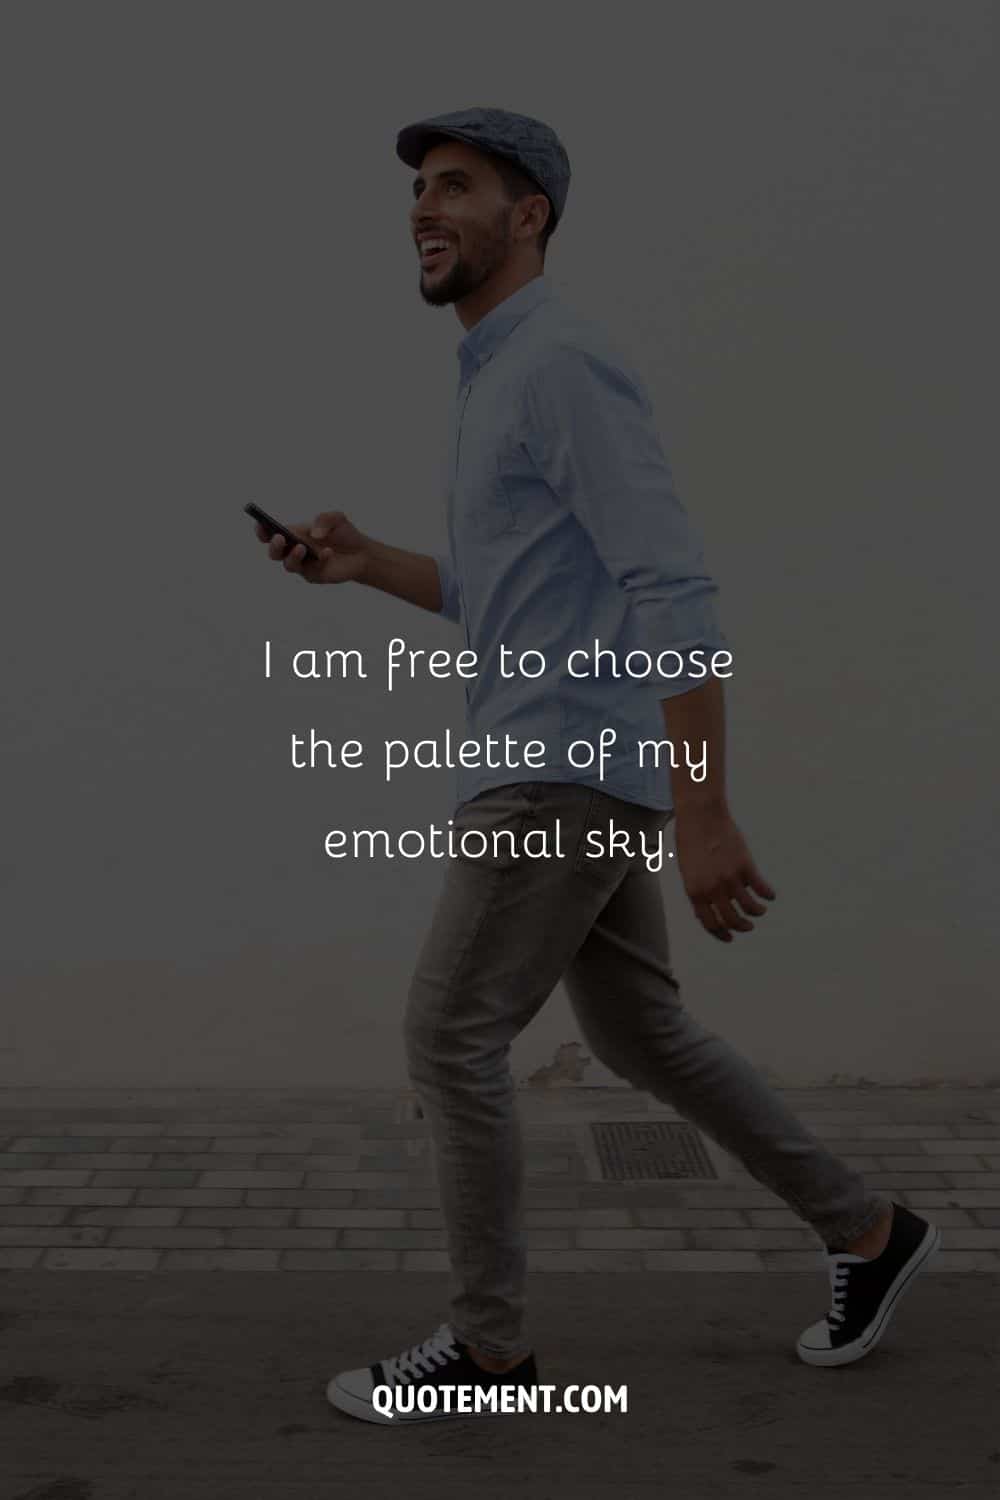 A happy man strolling with phone in hand representing positive affirmation for Friday.